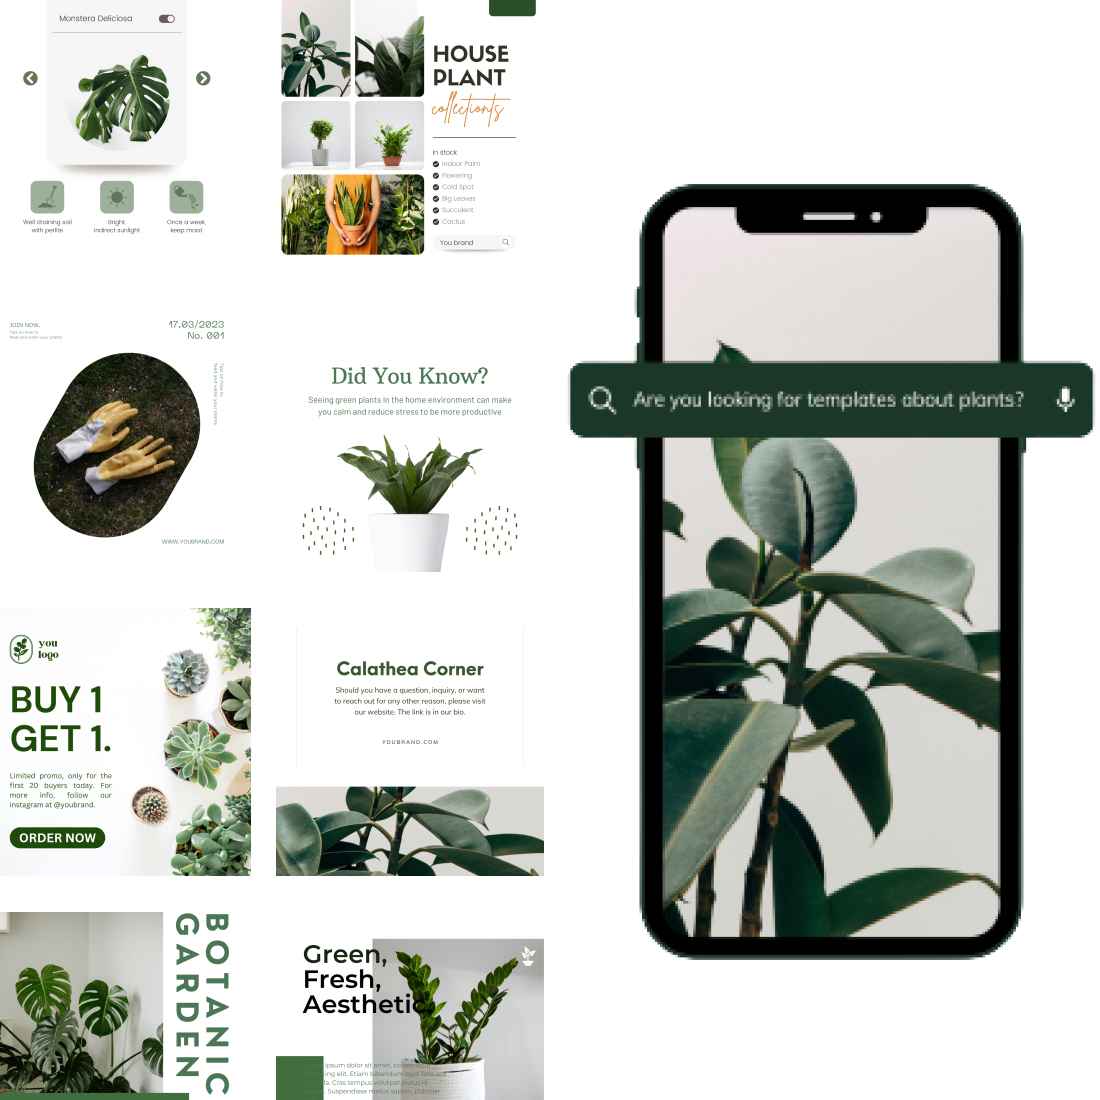 85 PLANT HOUSE TEMPLATE INSTAGRAM ONLY $7 preview image.